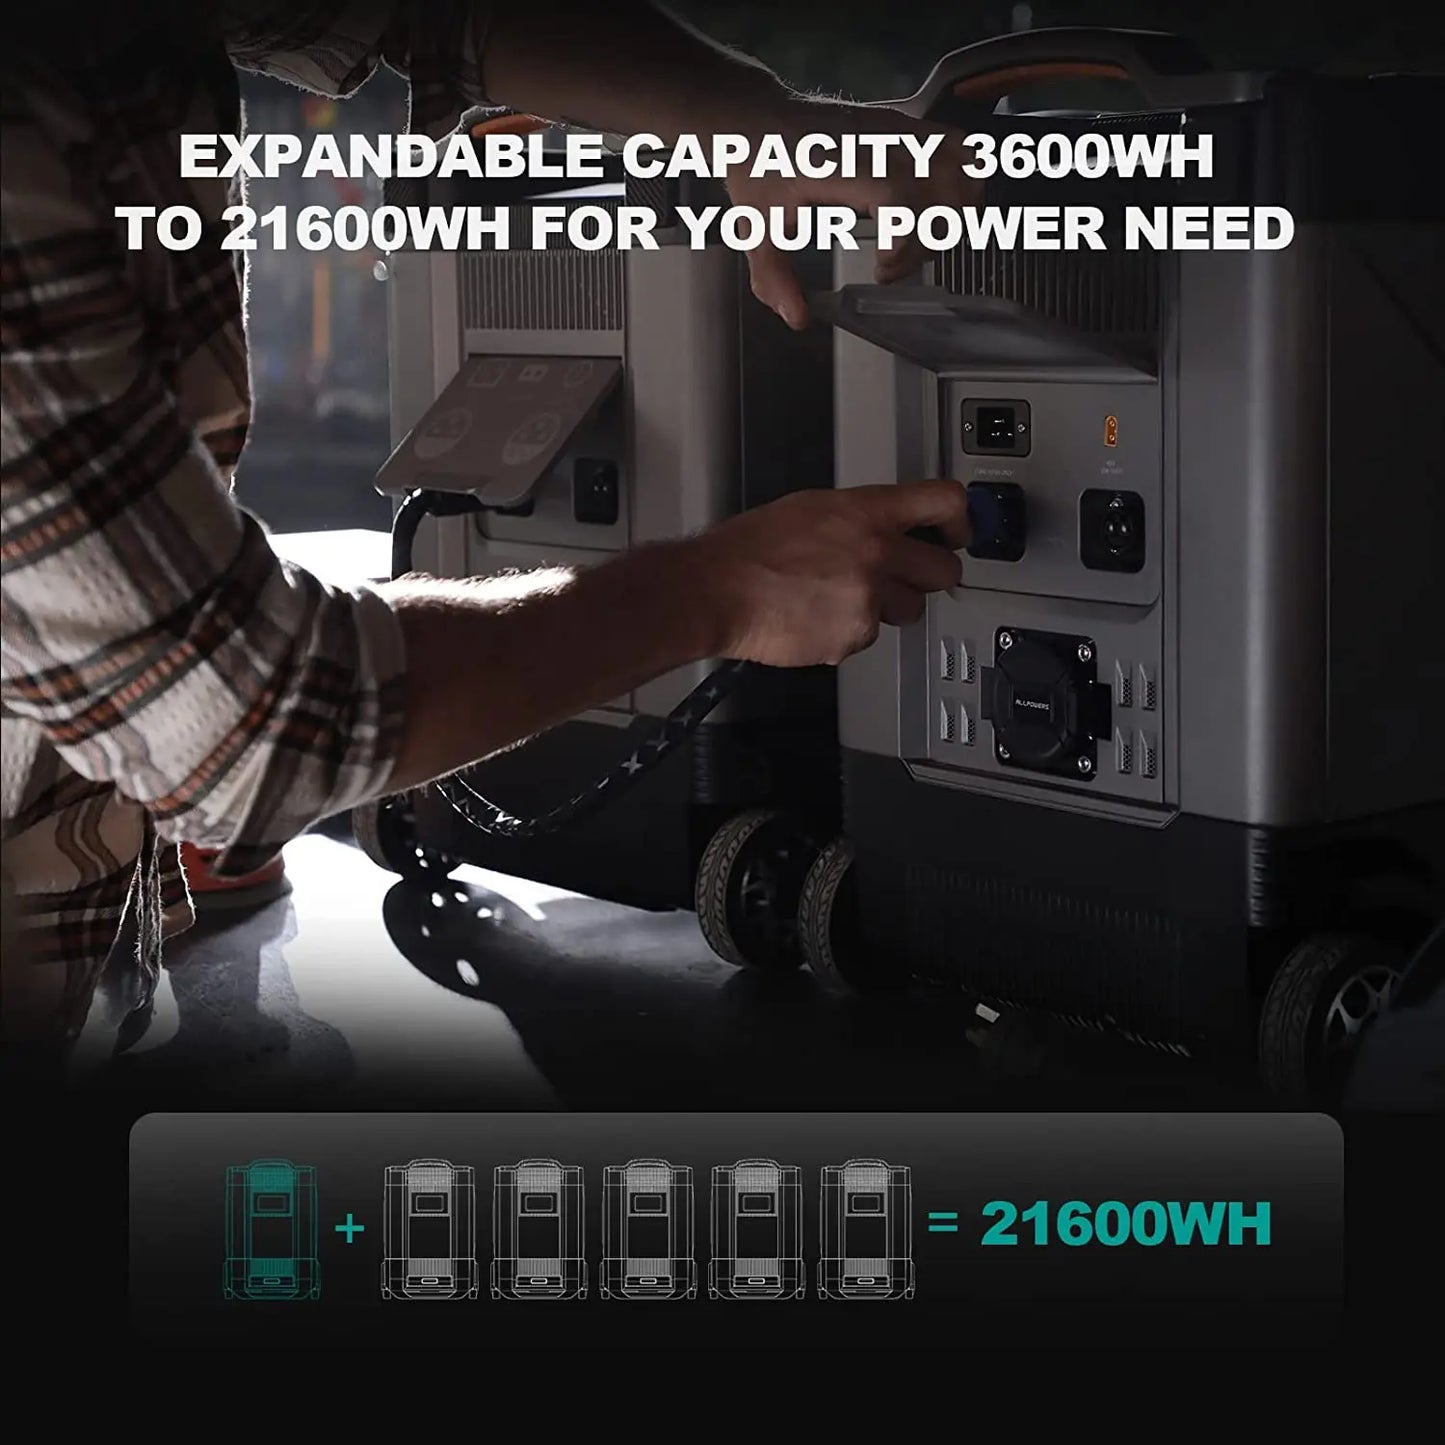 ALLPOWERS R4000 LiFePO4 Battery, 3600Wh Power Station 4000W Portable Generator, Expandable Battery for Power Outage, Travel，UPS